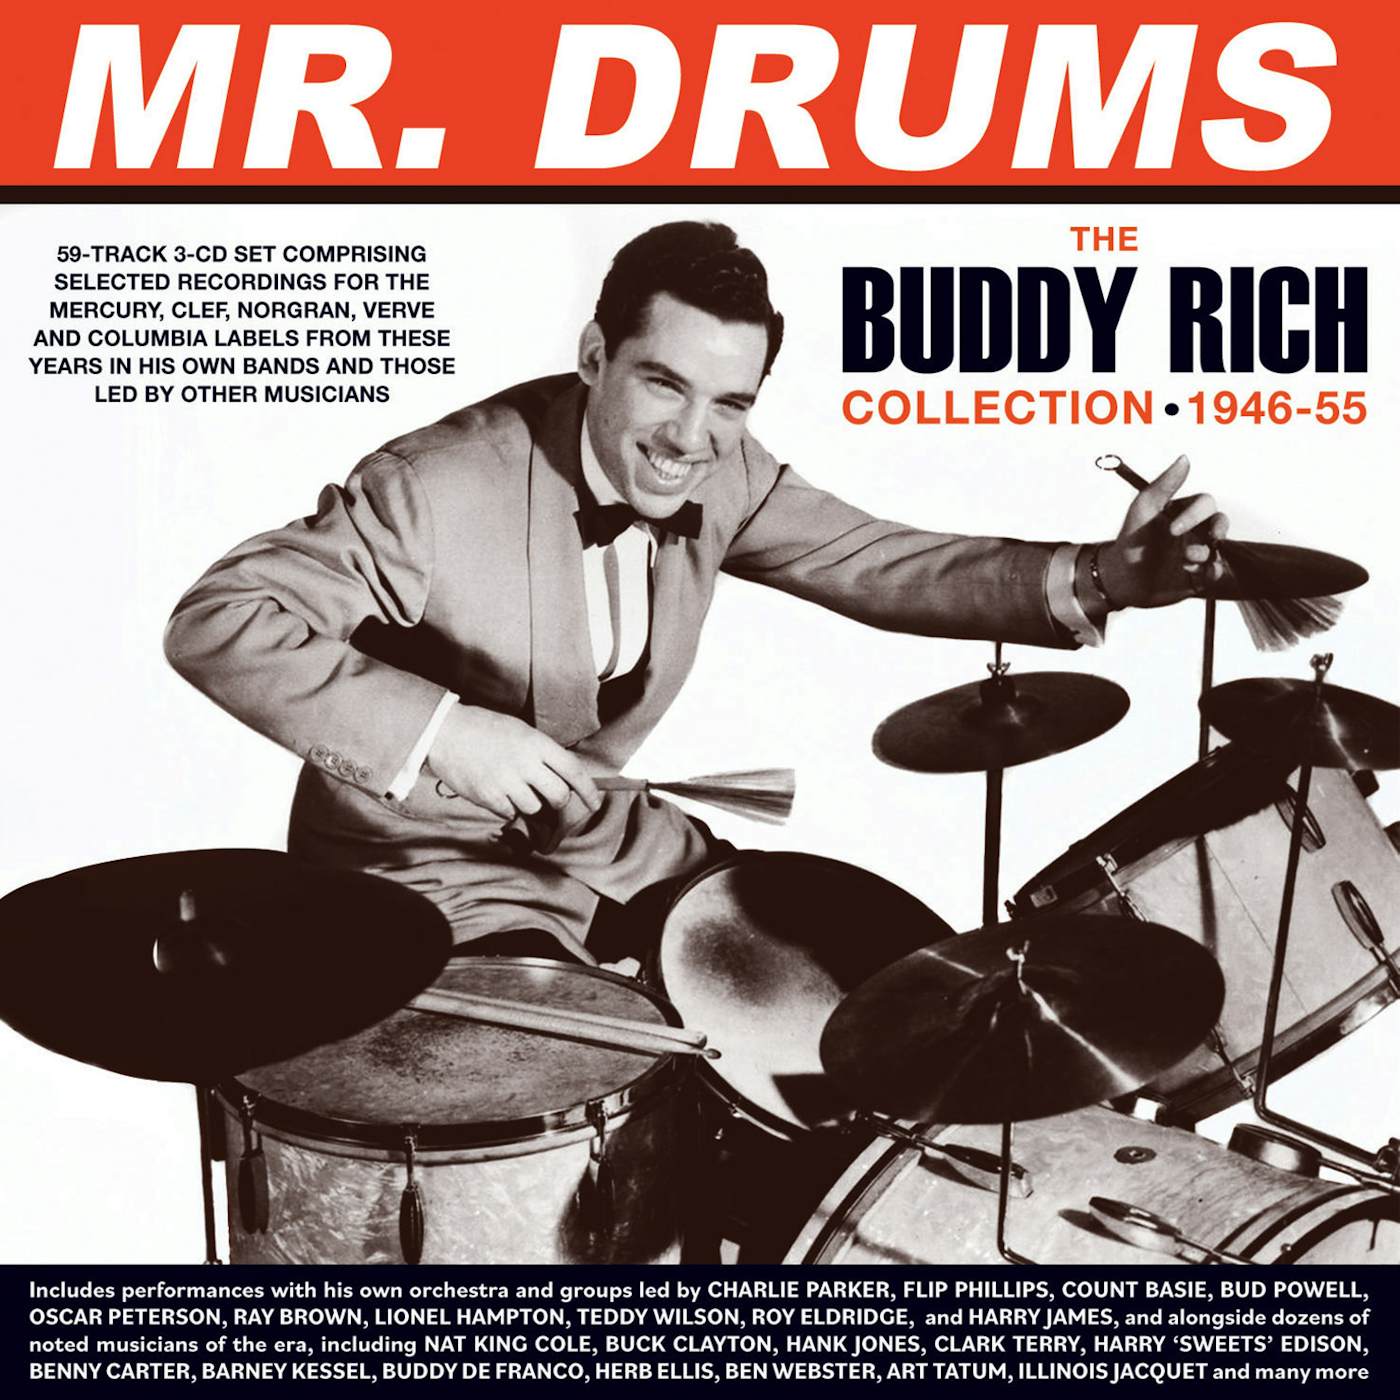 MR. DRUMS: THE BUDDY RICH COLLECTION 1946-55 (3CD) CD